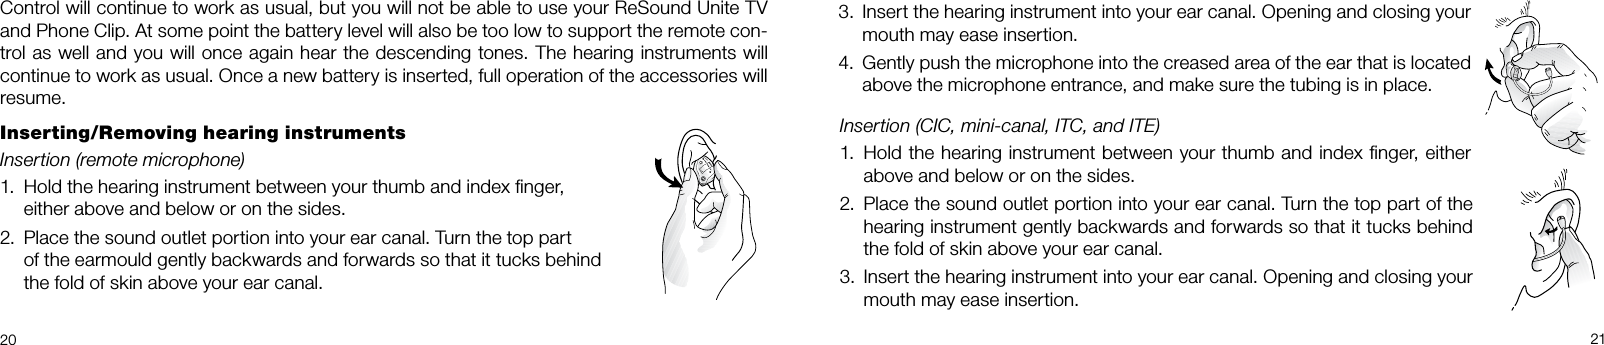 20 213.  Insert the hearing instrument into your ear canal. Opening and closing your mouth may ease insertion.4.  Gently push the microphone into the creased area of the ear that is located above the microphone entrance, and make sure the tubing is in place.Control will continue to work as usual, but you will not be able to use your ReSound Unite TV and Phone Clip. At some point the battery level will also be too low to support the remote con-trol as well and you will once again hear the descending tones. The hearing instruments will continue to work as usual. Once a new battery is inserted, full operation of the accessories will resume.Inserting/Removing hearing instrumentsInsertion (remote microphone) 1.  Hold the hearing instrument between your thumb and index ﬁnger,  either above and below or on the sides.2.  Place the sound outlet portion into your ear canal. Turn the top part    of the earmould gently backwards and forwards so that it tucks behind  the fold of skin above your ear canal.Insertion (CIC, mini-canal, ITC, and ITE)1.  Hold the hearing instrument between your thumb and index ﬁnger, either above and below or on the sides.2.  Place the sound outlet portion into your ear canal. Turn the top part of the hearing instrument gently backwards and forwards so that it tucks behind the fold of skin above your ear canal.3.  Insert the hearing instrument into your ear canal. Opening and closing your mouth may ease insertion. 